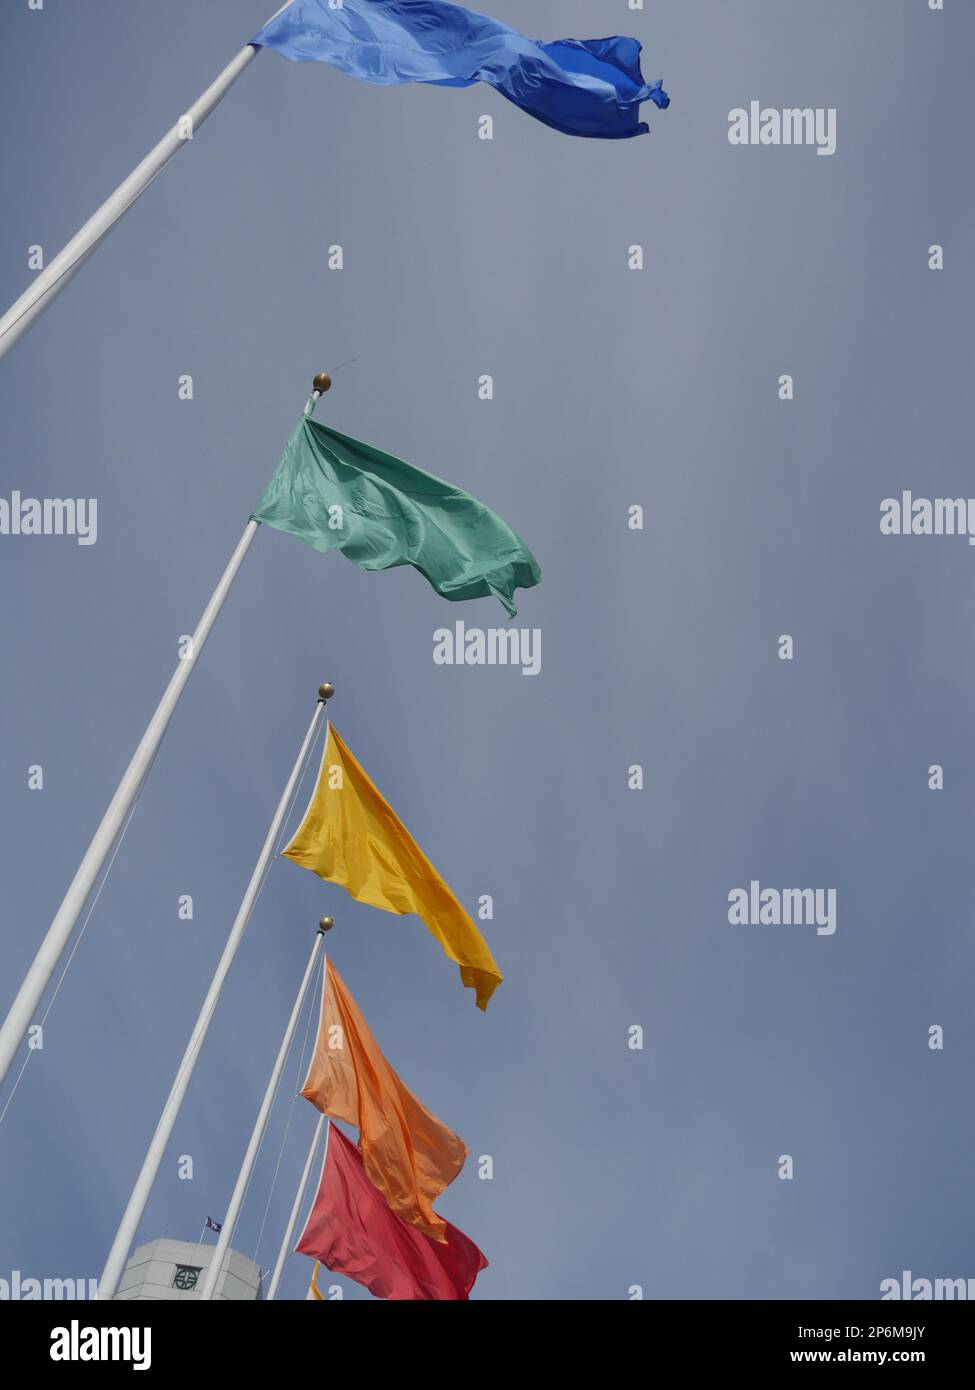 Flags of different colors on flagpoles Stock Photo